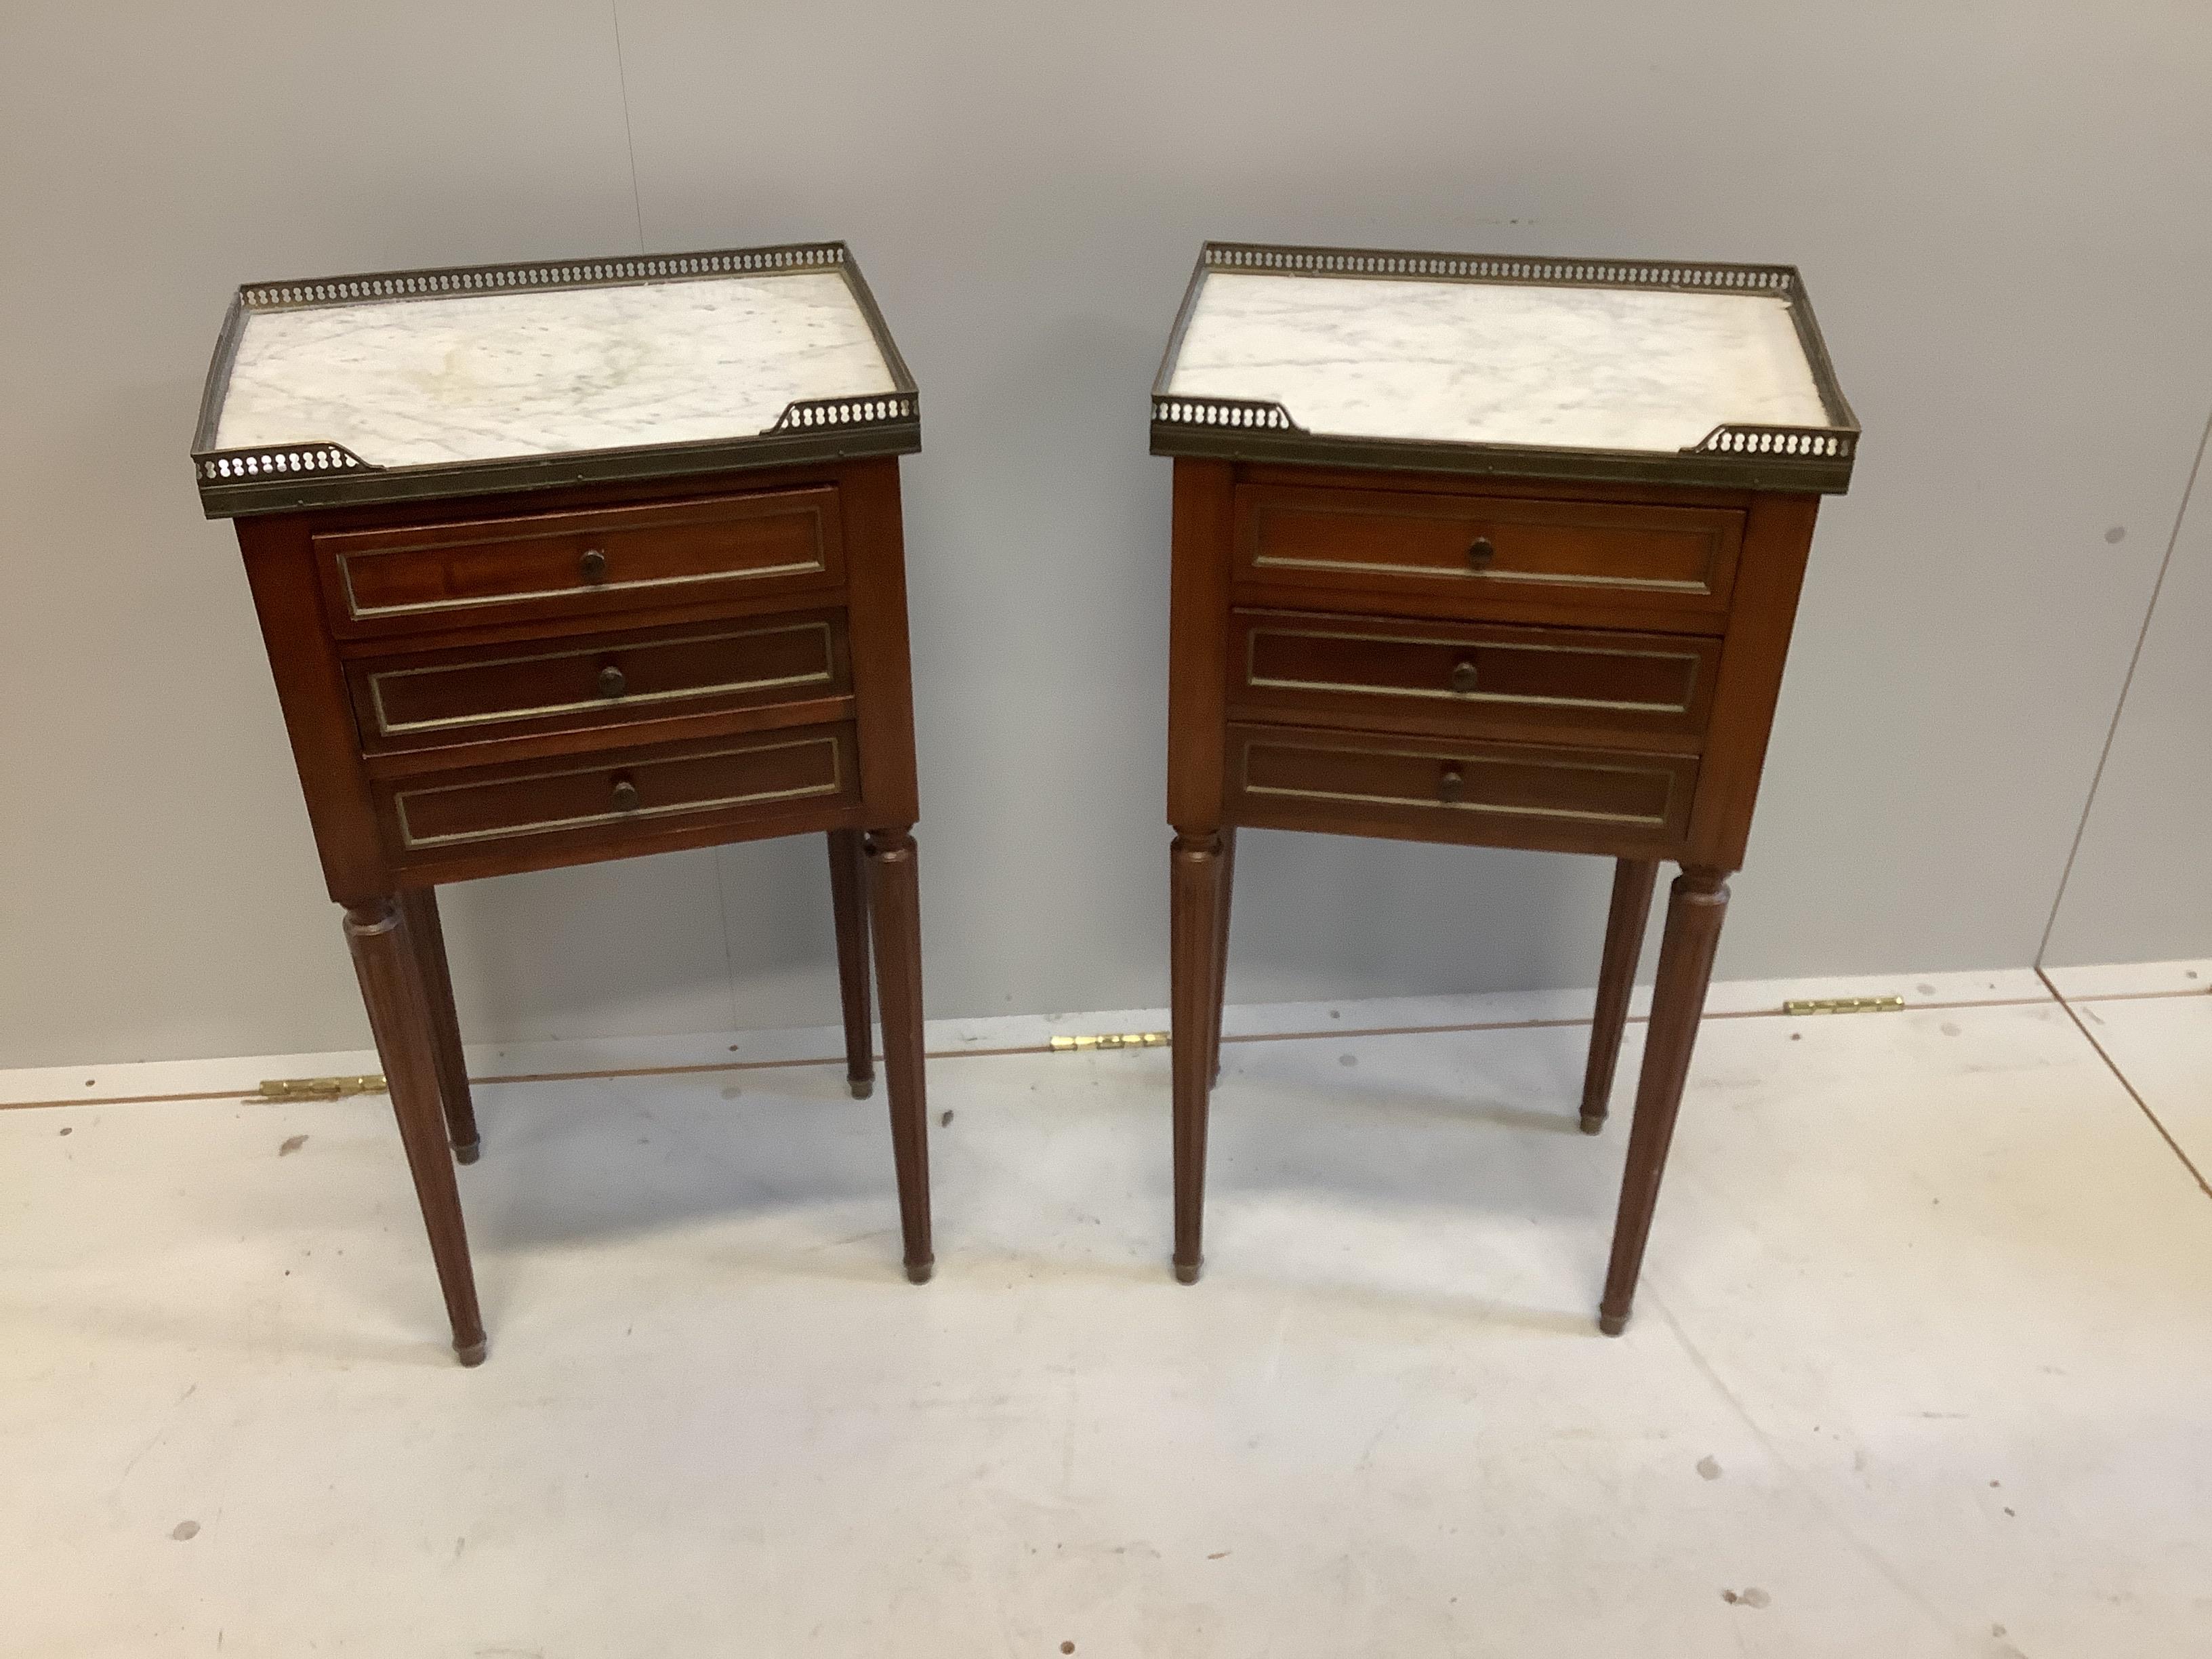 A pair of French brass mounted marble topped mahogany three drawer bedside chests, width 39cm, depth 28cm, height 73cm